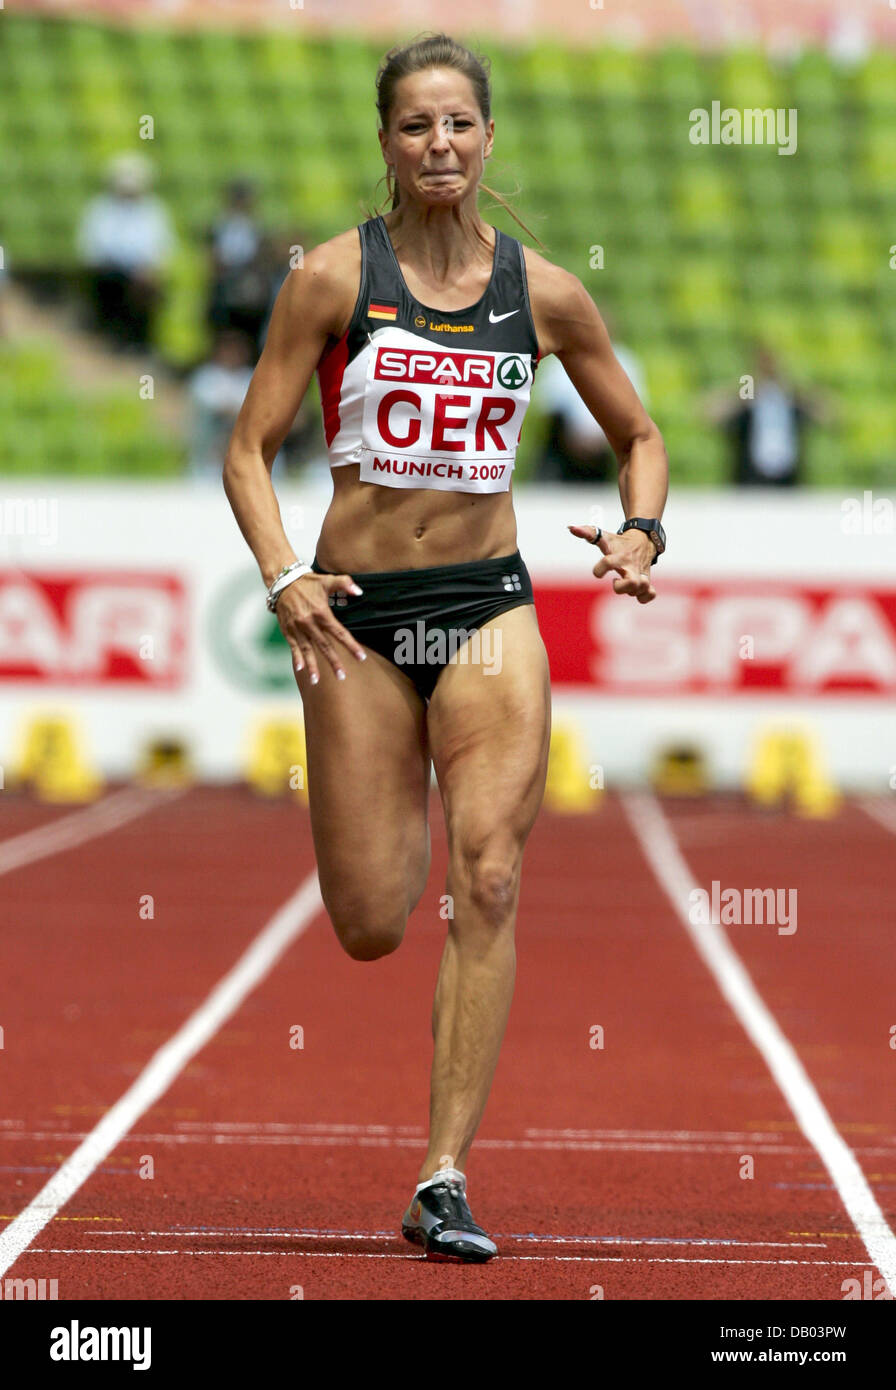 German sprinter Sina Schielke is pictured during the second run of the 100m sprint competition at the SPAR European Cup in Munich, Germany, 23 June 2007. With 11,21 seconds, Schielke is the first German this year to underbid the norm for the world championships in Japan in August. Photo: Matthias Schrader Stock Photo